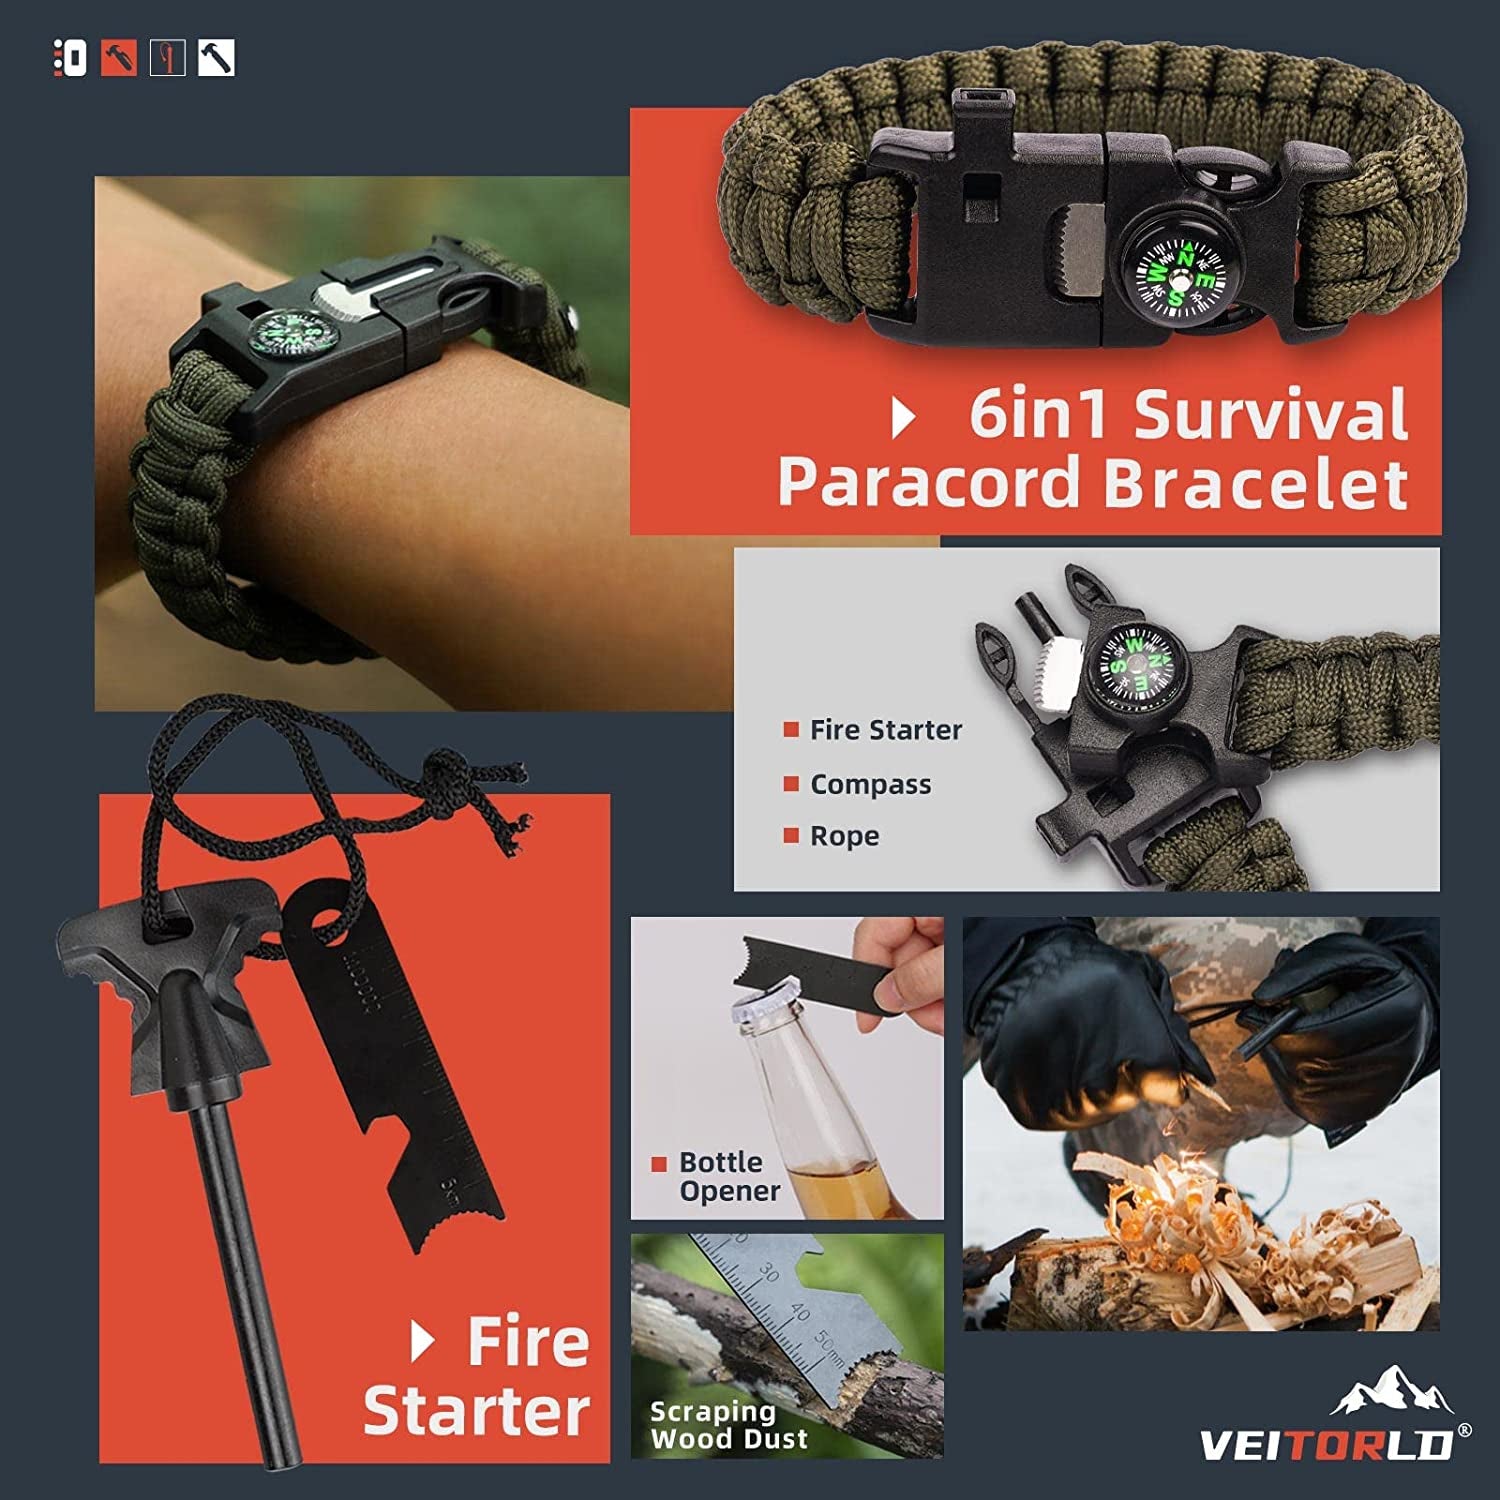 "Ultimate Survival Kit: The Perfect Gift for Adventurous Men - 12-in-1 Gear and Equipment Set for Fishing, Hunting, and More! Ideal for Christmas, Birthdays, and Stocking Stuffers!"